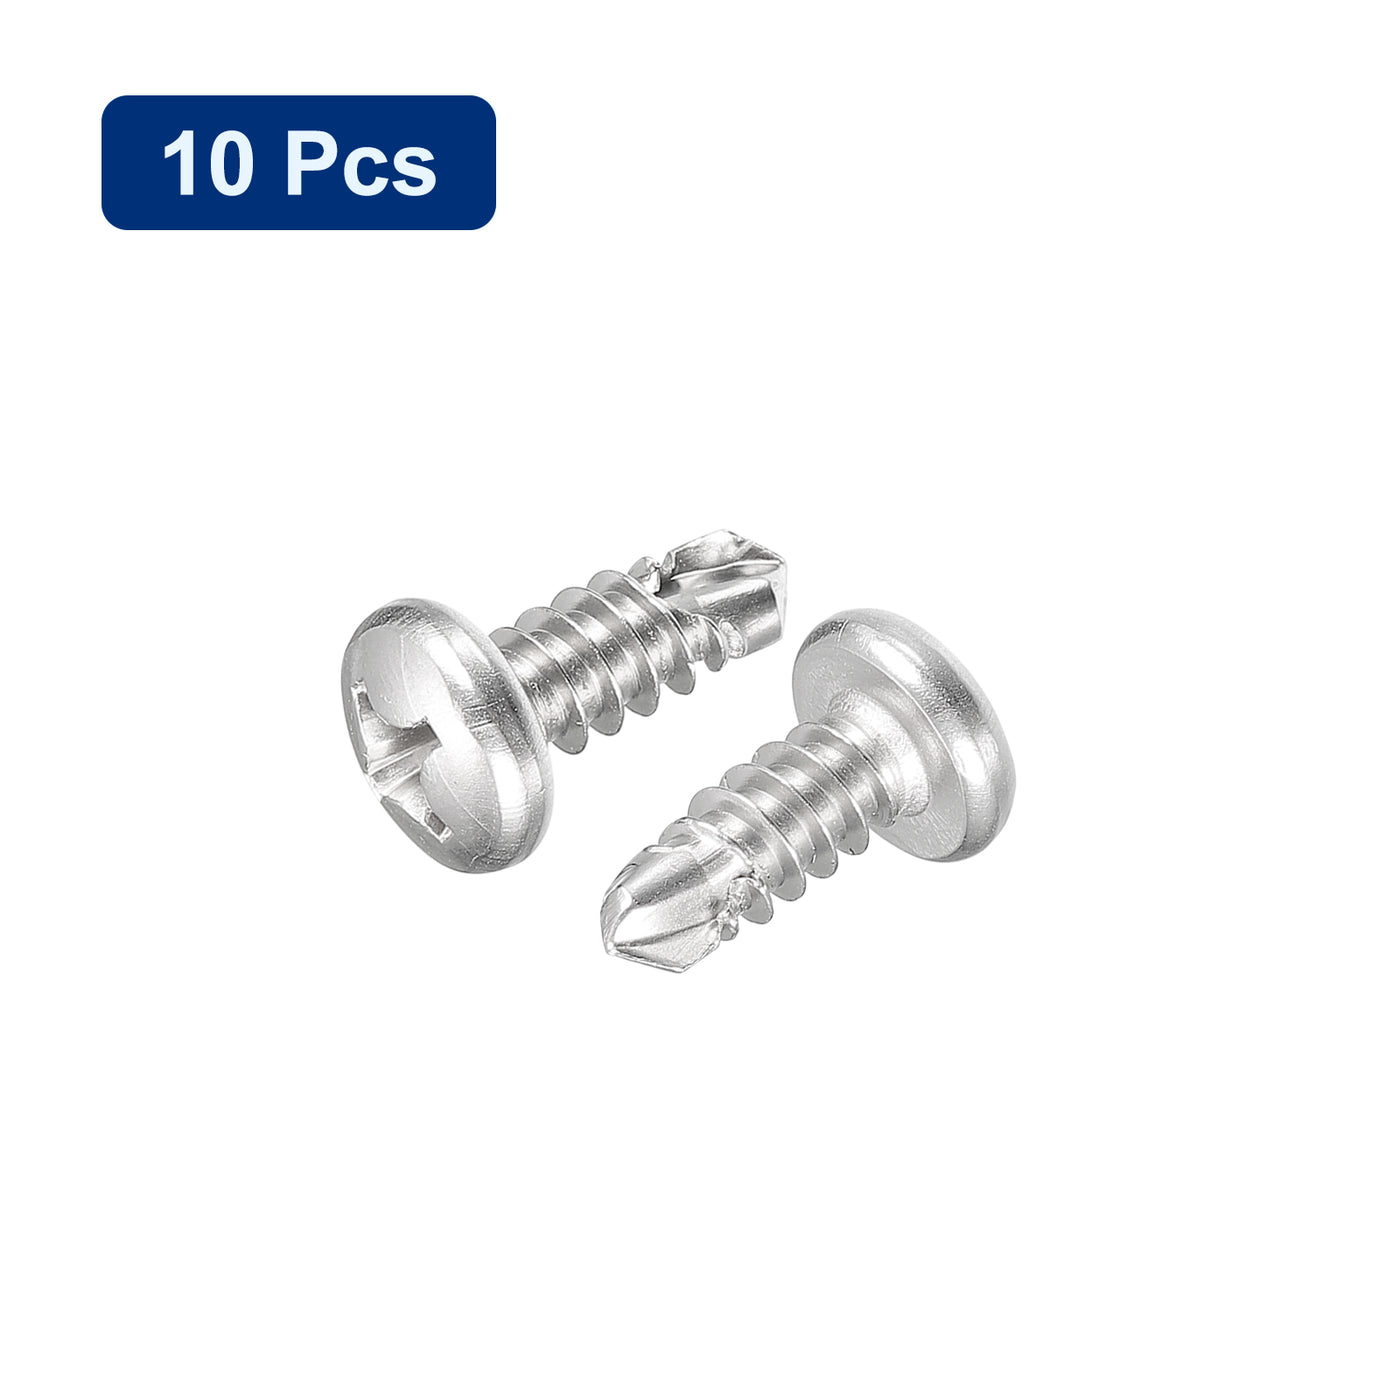 uxcell Uxcell #14 x 5/8" Self Drilling Screws, 10pcs Phillips Pan Head Self Tapping Screws